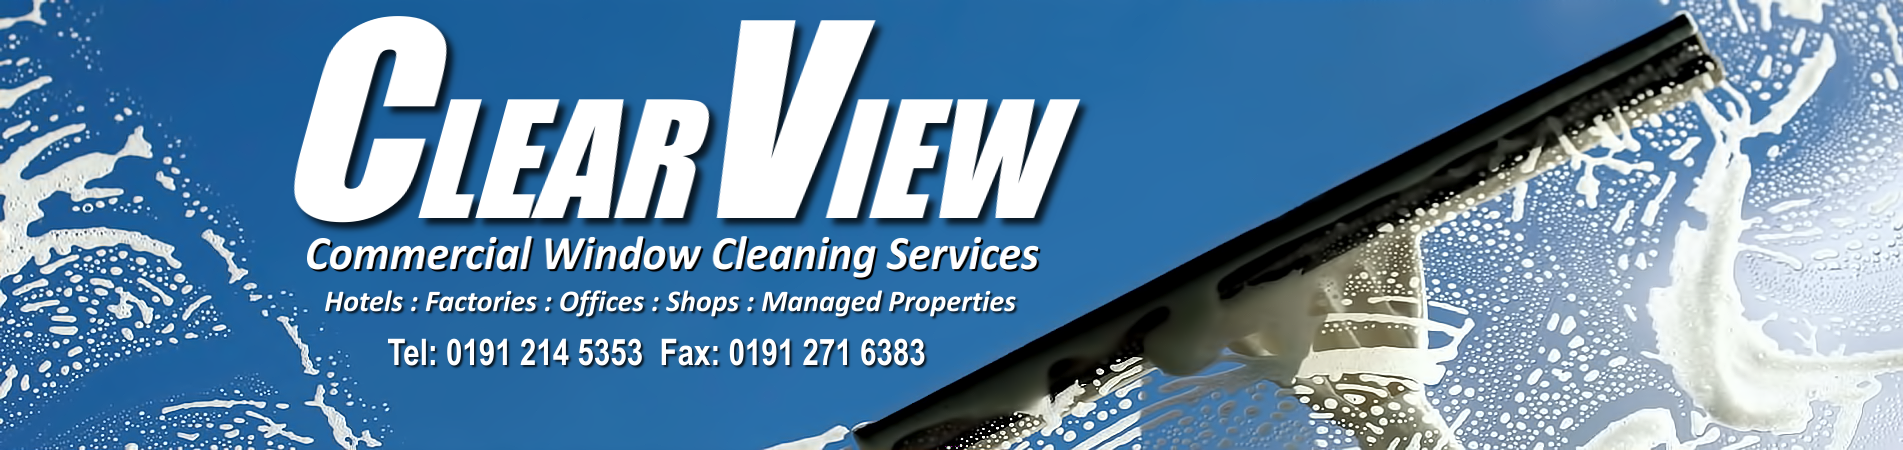 clearview cleaning hesperia ca